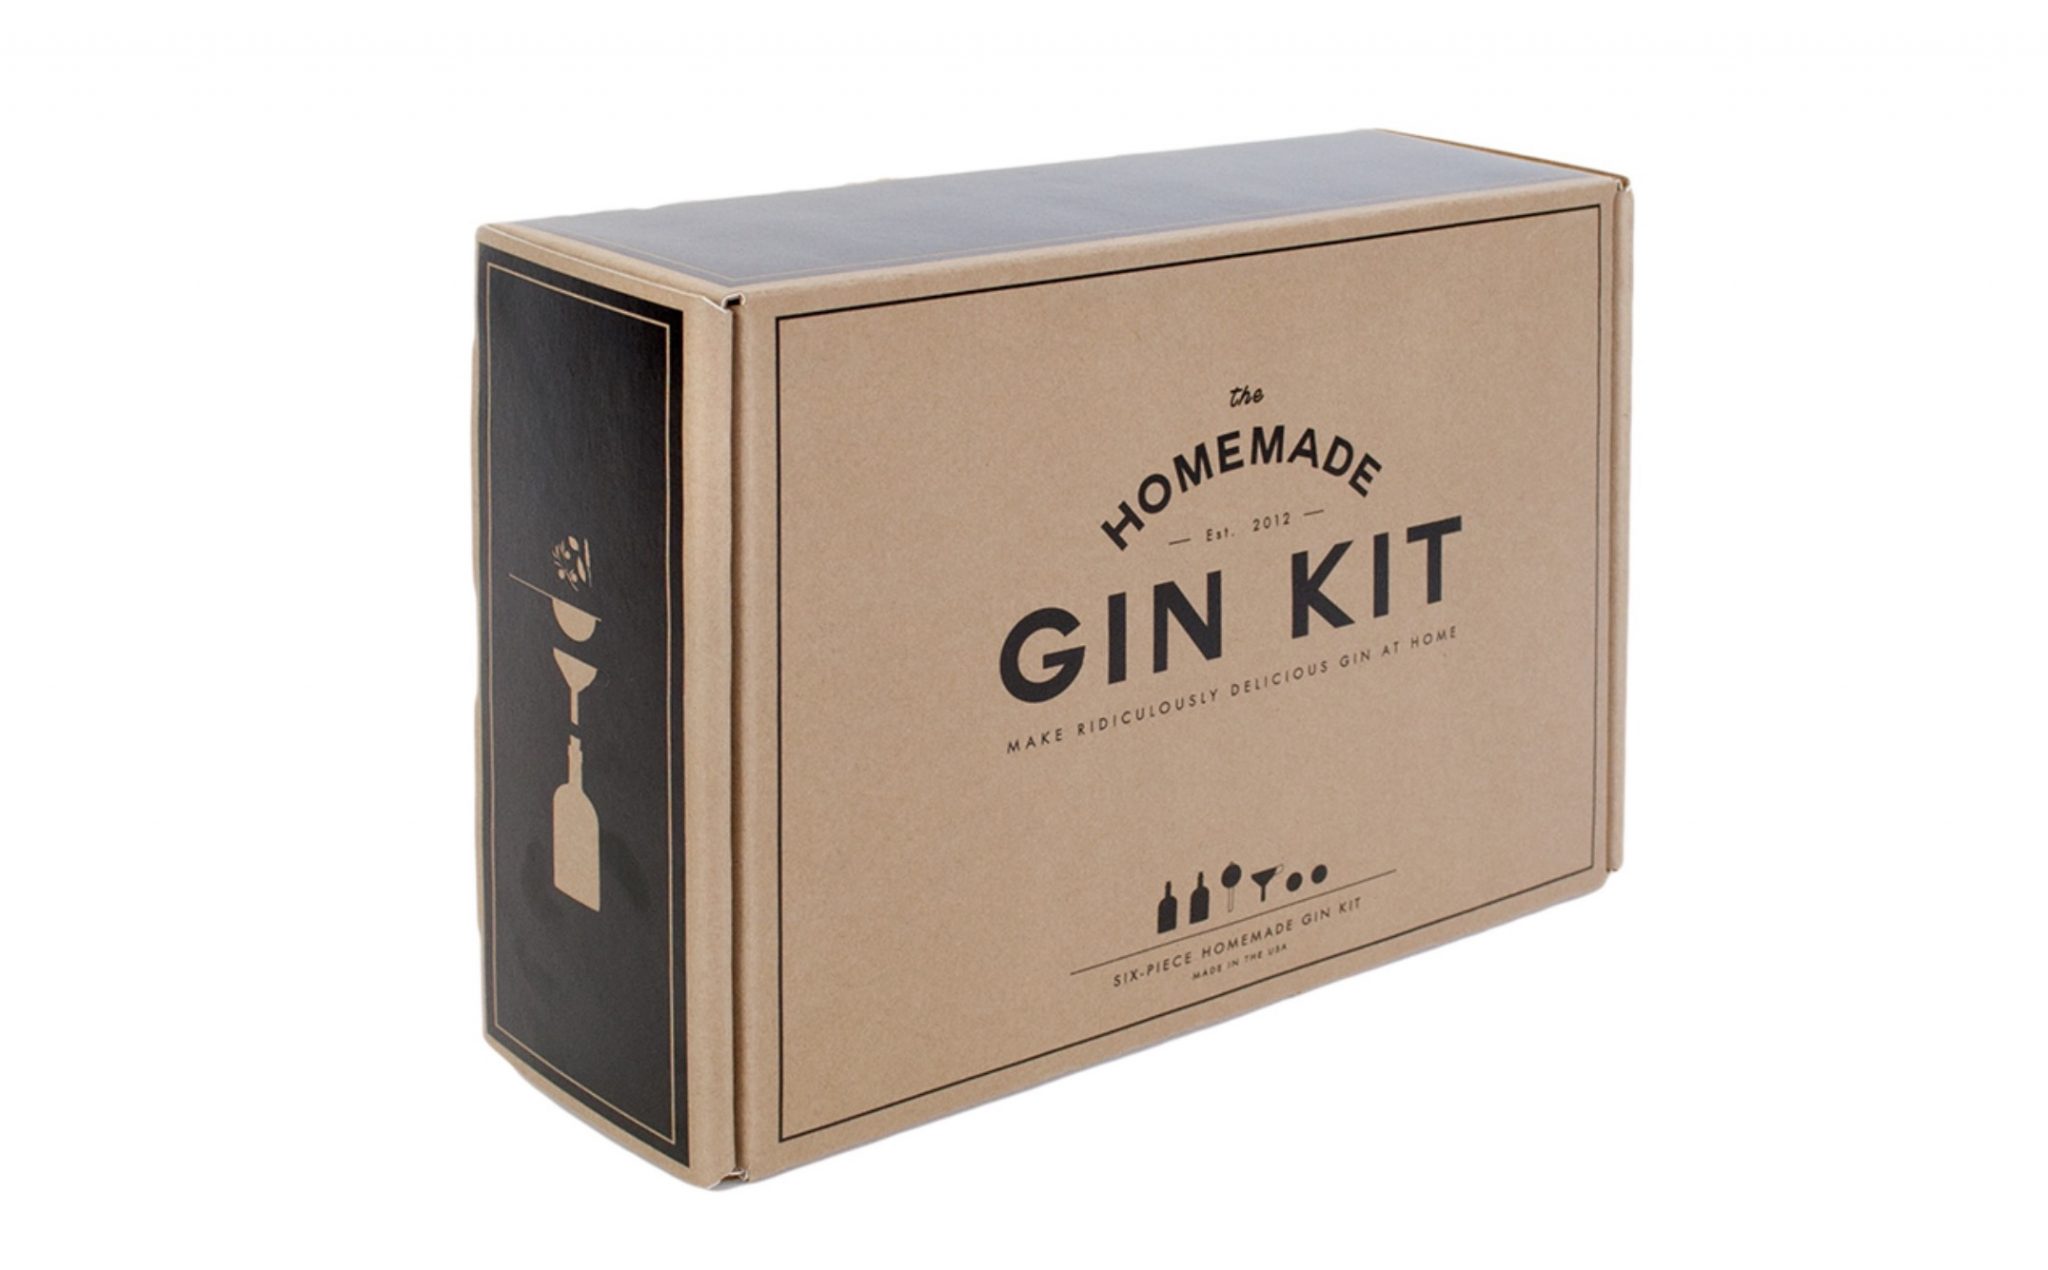 W&P Homemade Gin Kit, Make Your Own Kit, Botanical Blend and Juniper  Berries, Home Kit, Kitchen Essentials, DIY